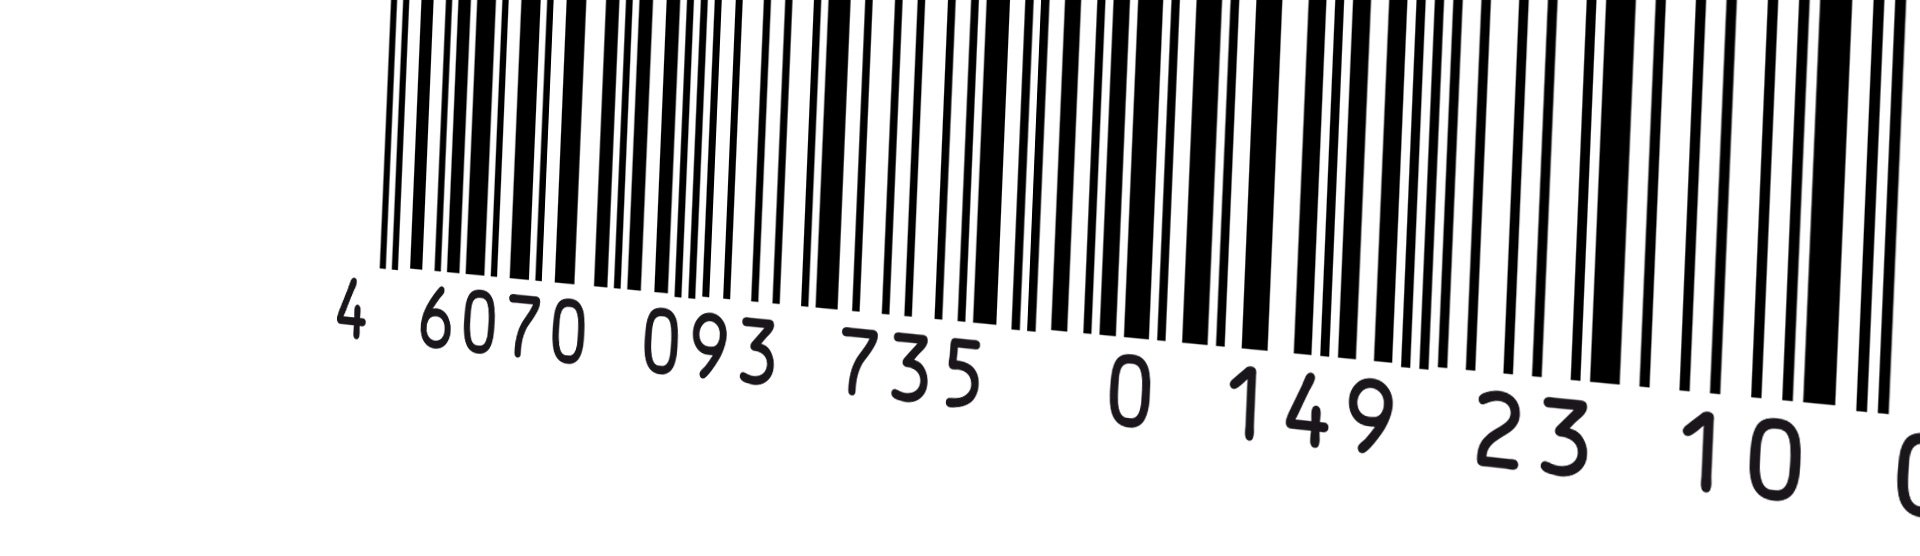 Carrier and Material Tracking Bar Code